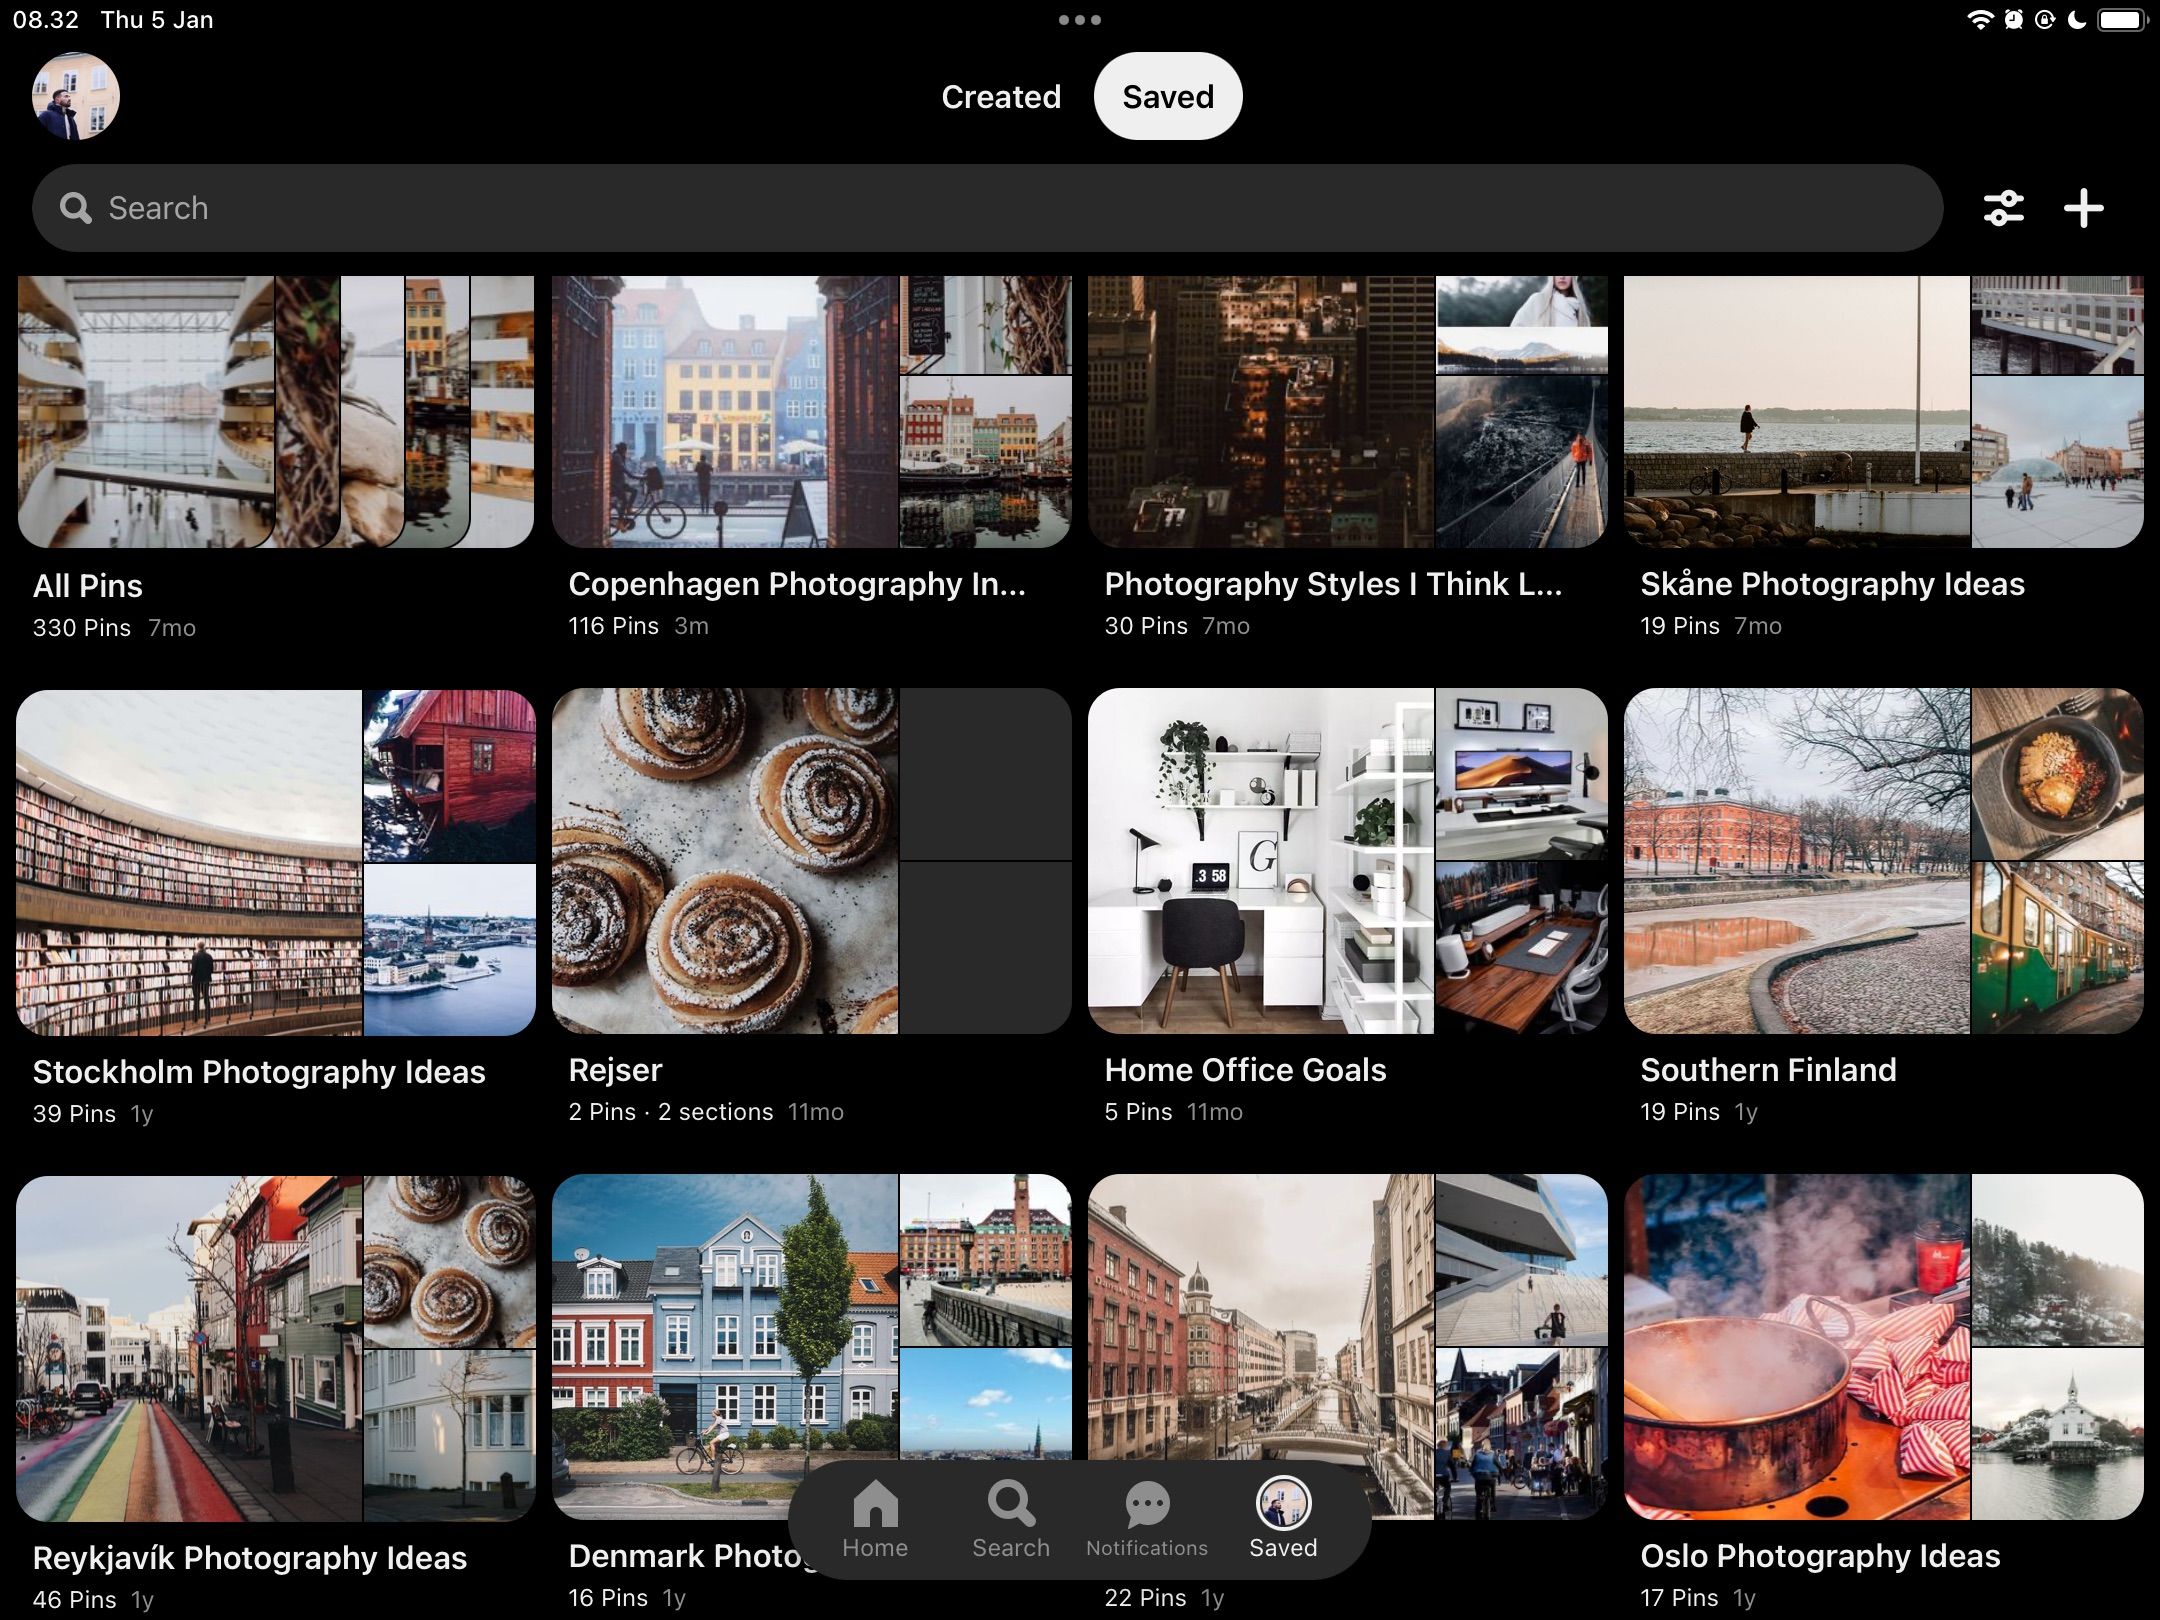 Screenshot showing different boards on Pinterest